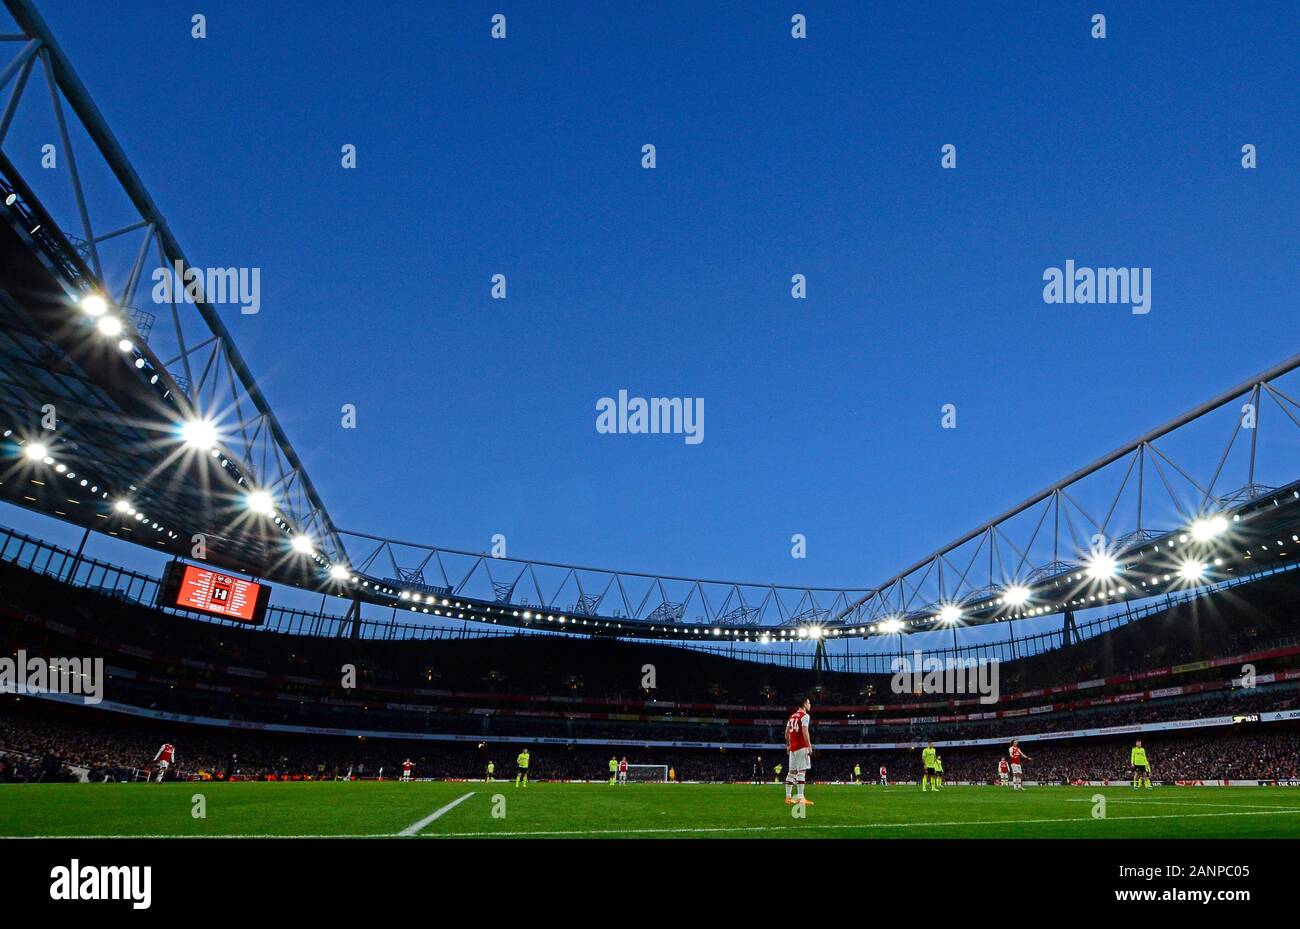 LONDON, ENGLAND - JANUARY 18, 2020: pictured during the 2019/20 Premier League game between Arsenal FC and Sheffield United FC at Emirates Stadium. Stock Photo